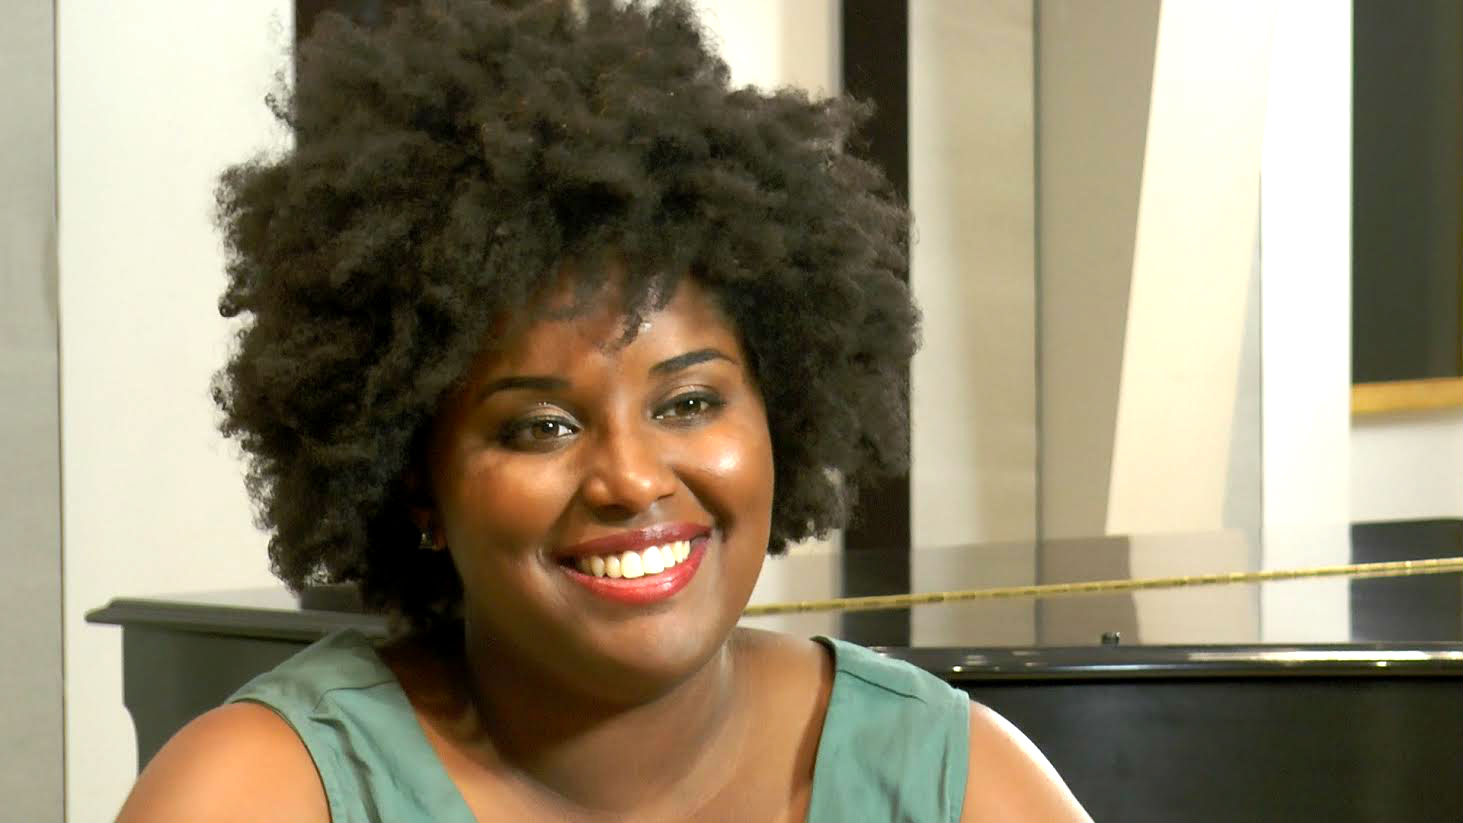 The Suffers' singer, Kam Franklin